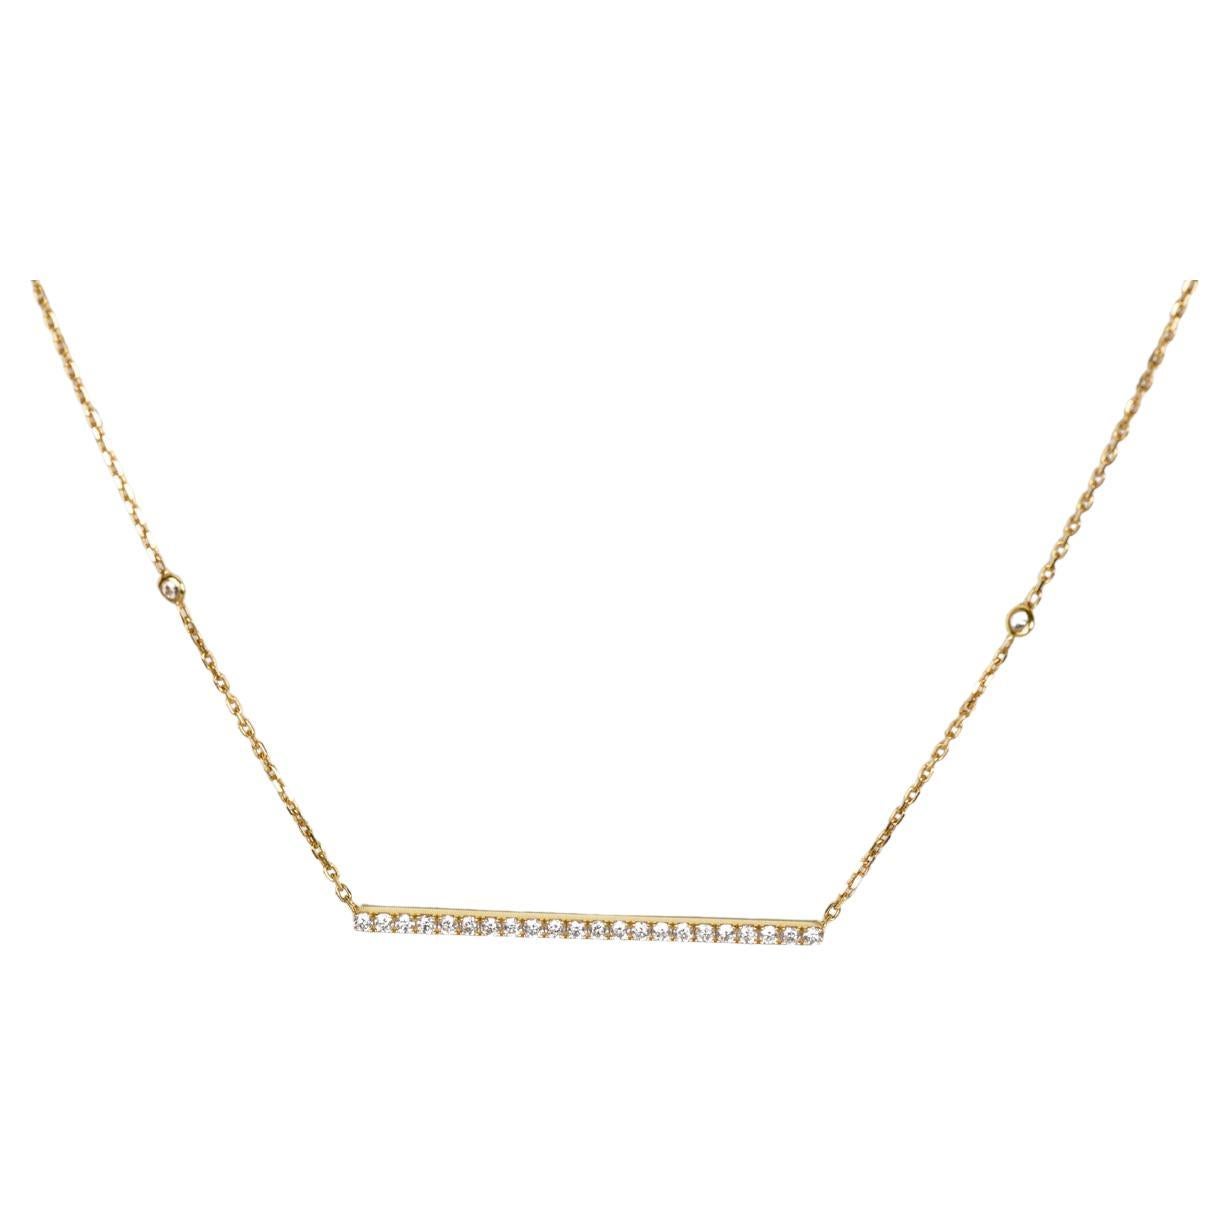 Messika Gatsby Necklace 18K Yellow Gold Diamonds For Sale